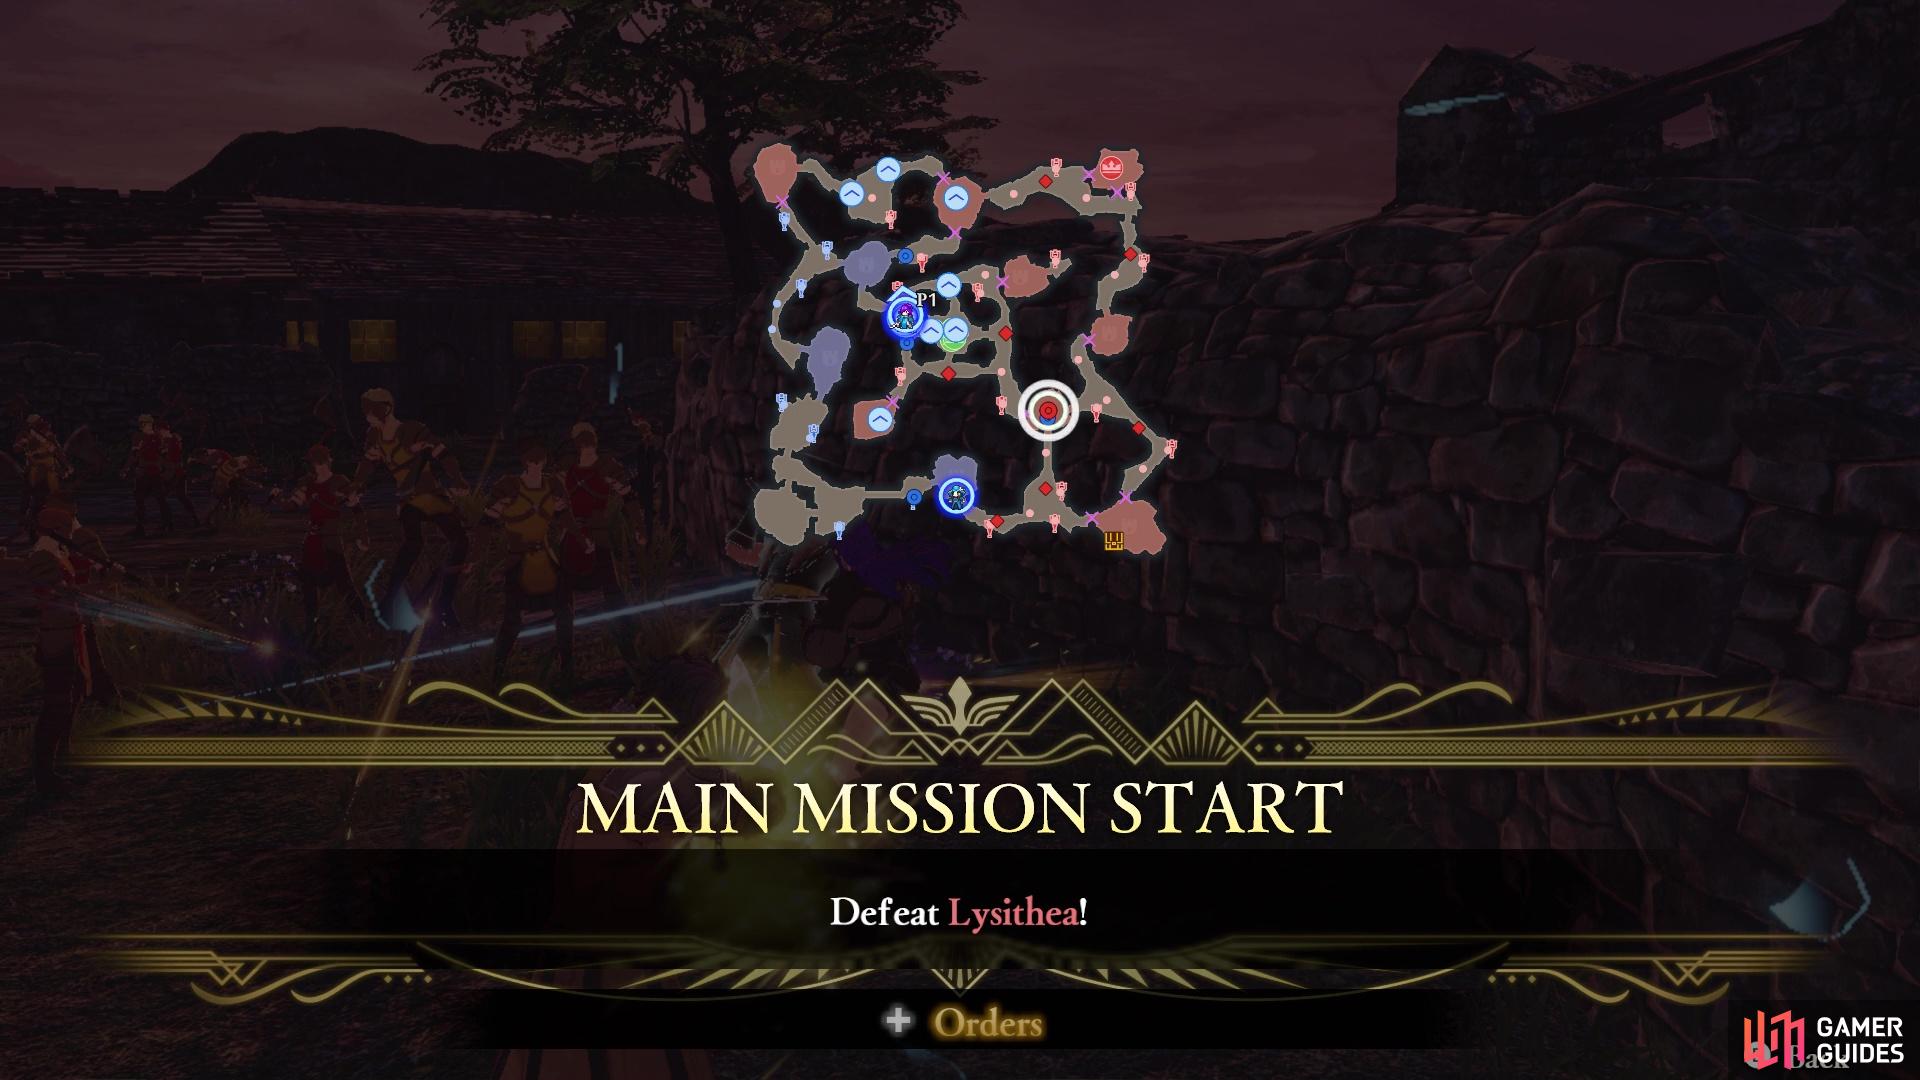 Lysithea will appear in this stronghold in the second set of missions